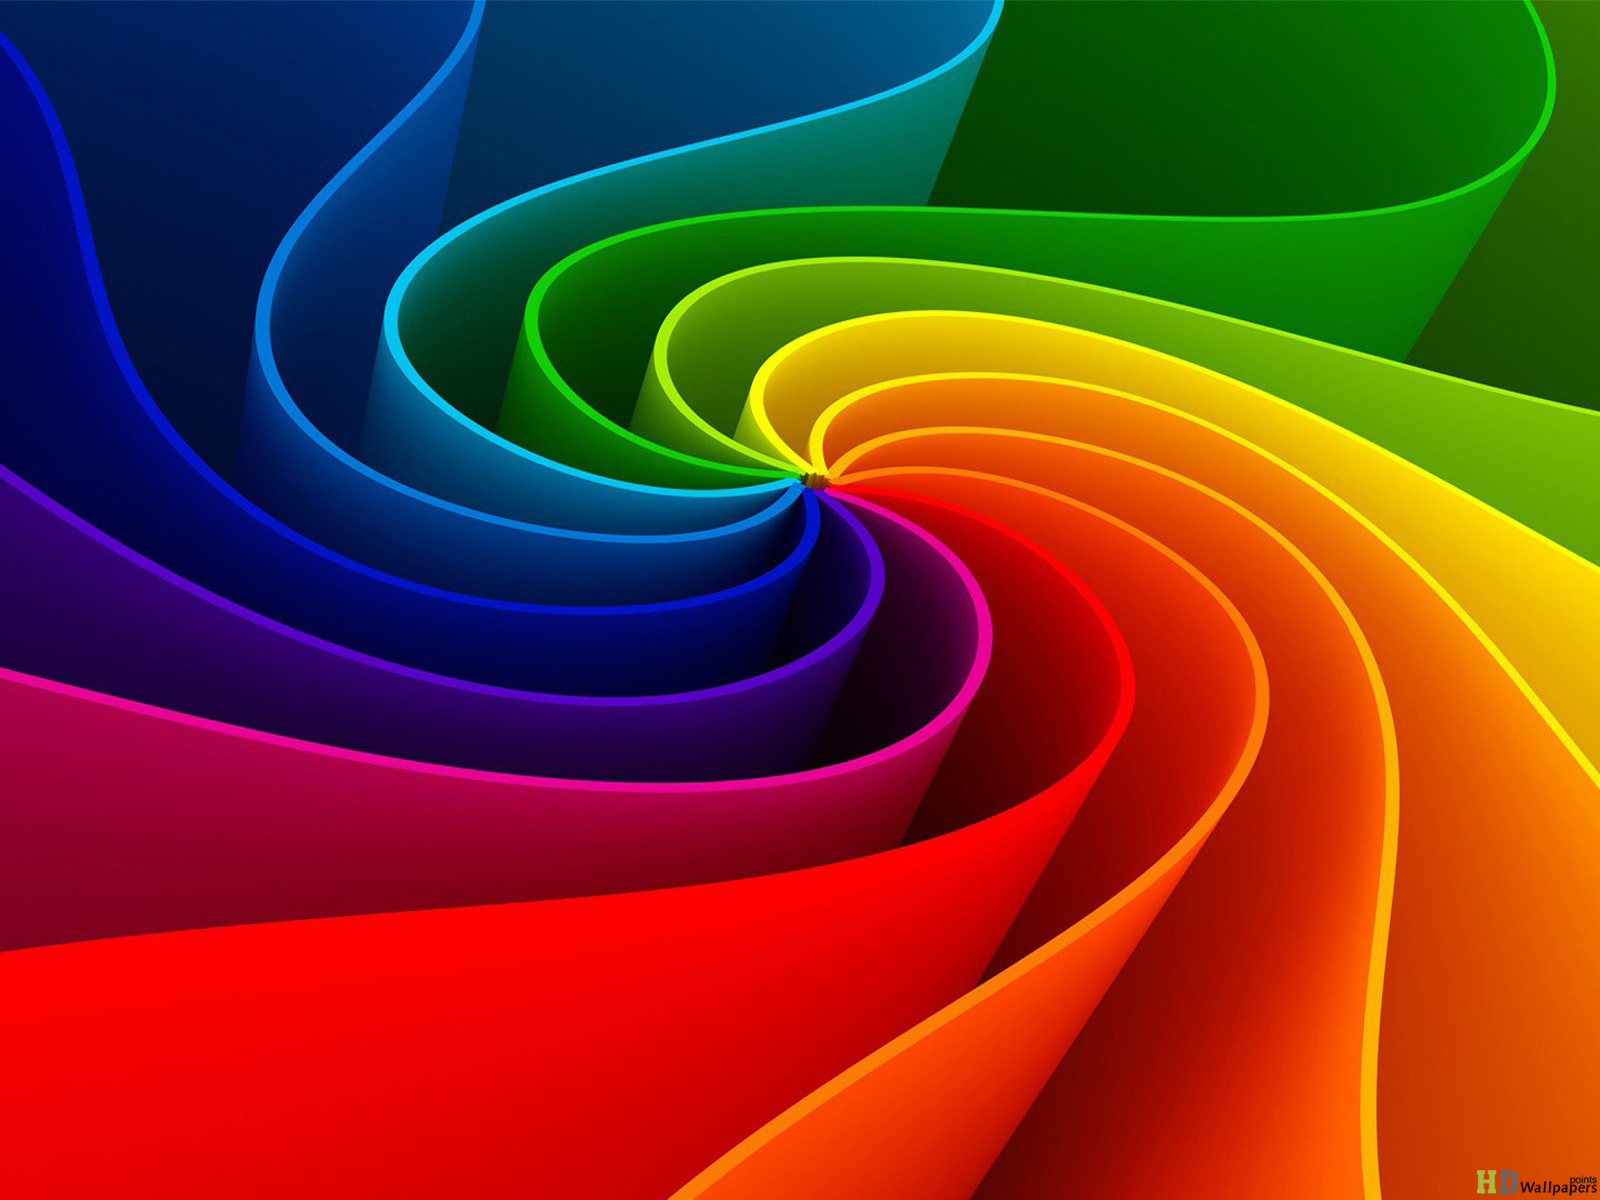 Rainbow 3d Backgrounds Images amp Pictures   Becuo